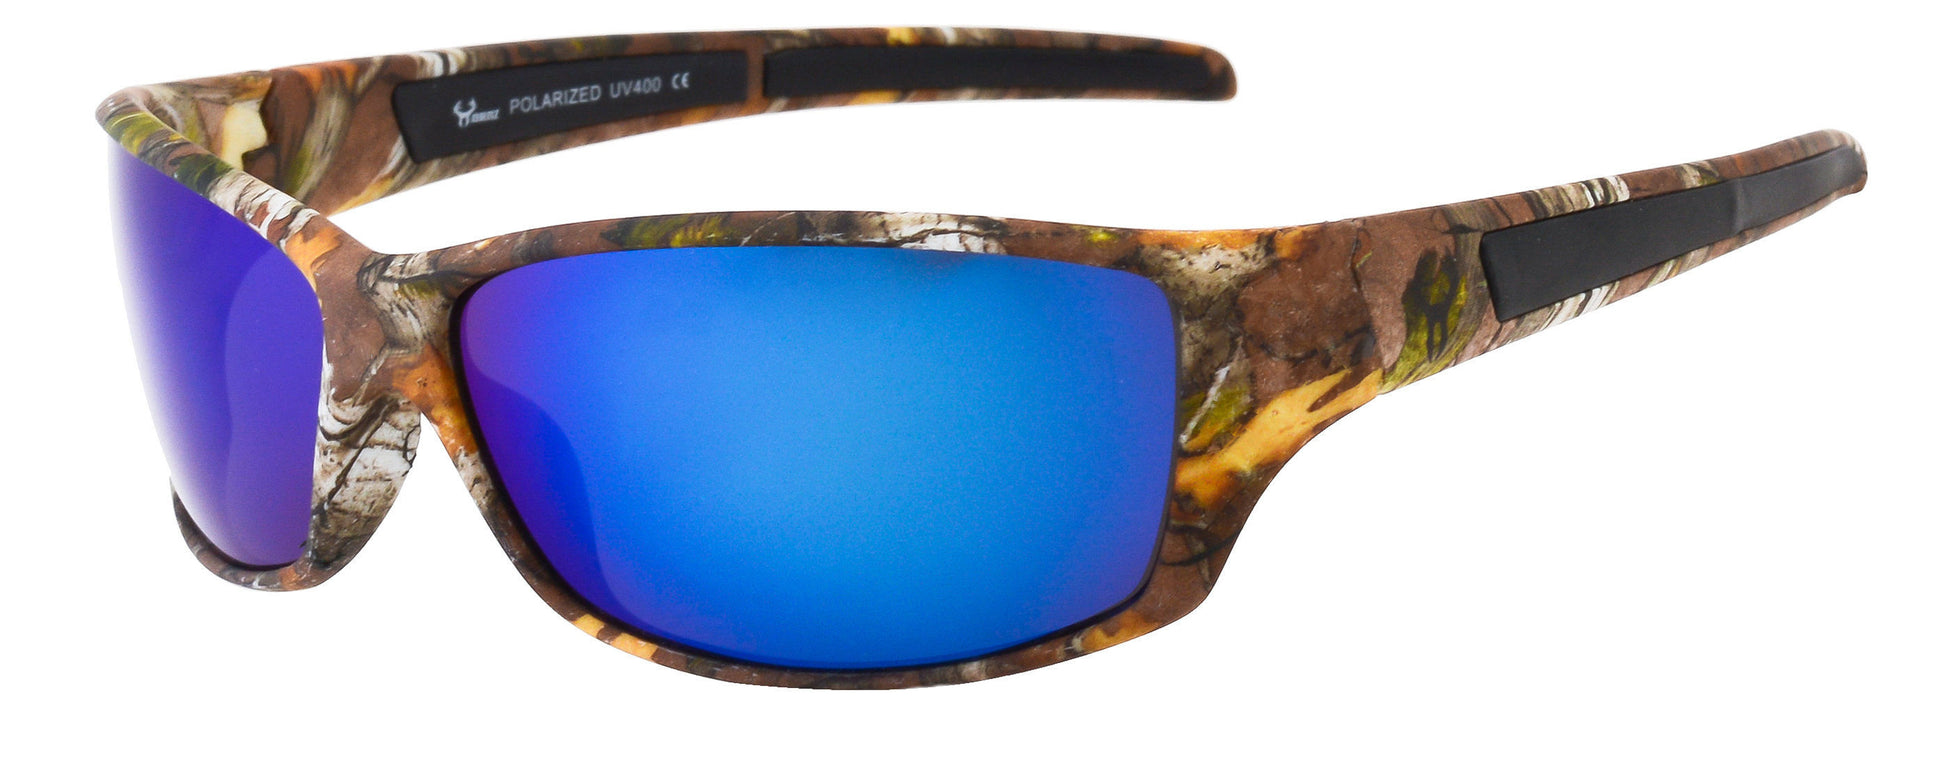 Hornz Brown Forest Camouflage Polarized Sunglasses for Men Full